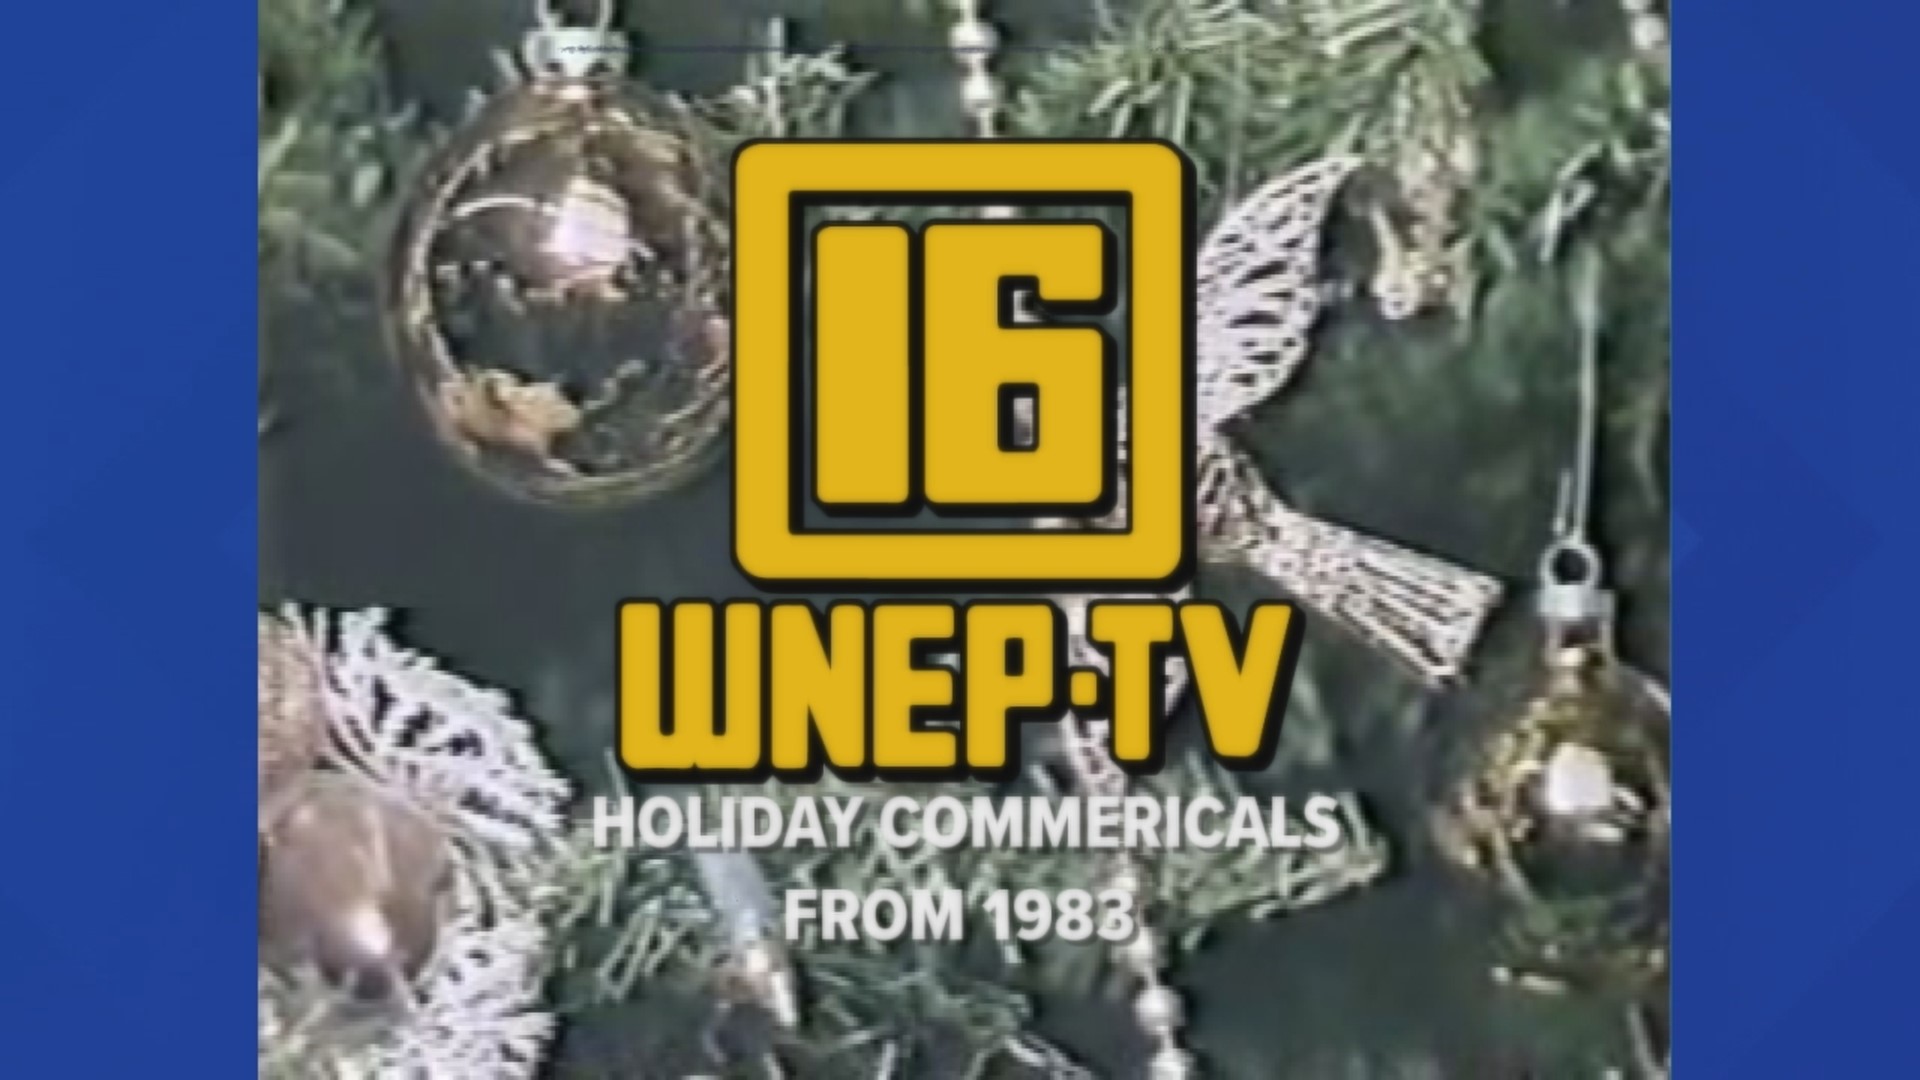 Watch some of the commercials that were on WNEP in 1983 during the holidays.